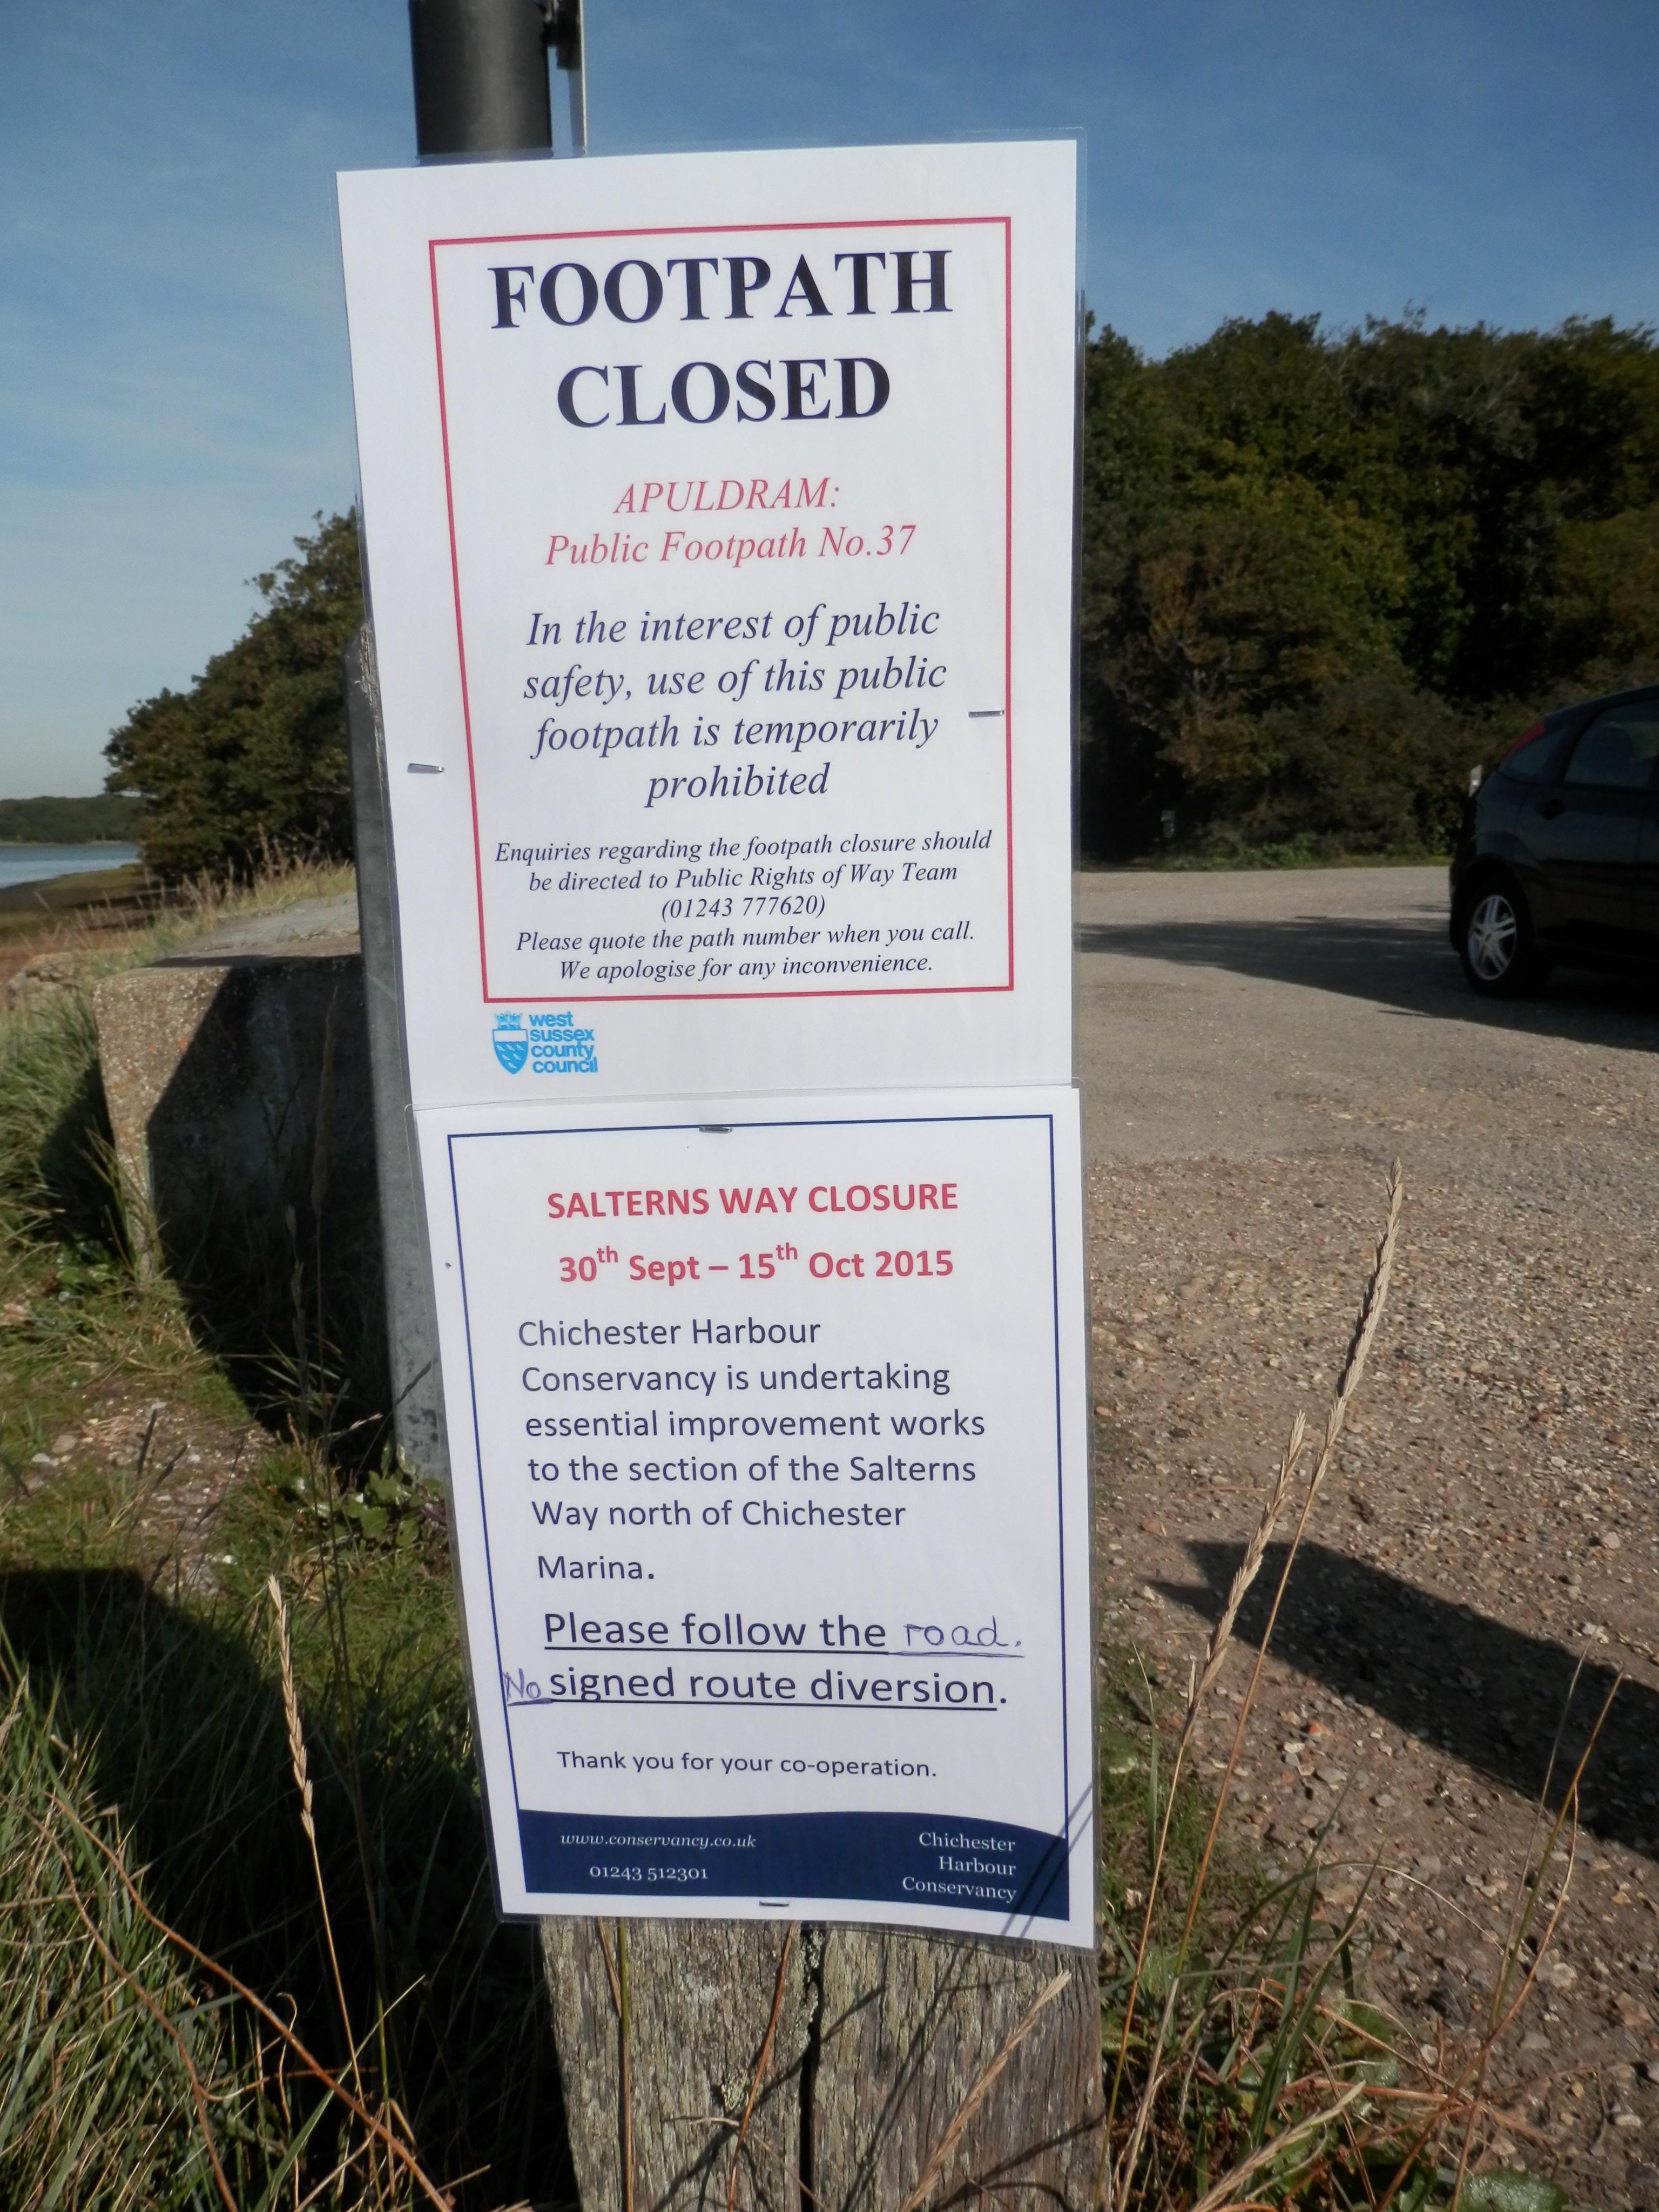 Chichester Harbour Conservancy Improvement Work Started On Footpath And Salterns Way Cycle Path North Of Chichester Marina Check Here For Updates Http T Co Ma8q59bspr Twitter